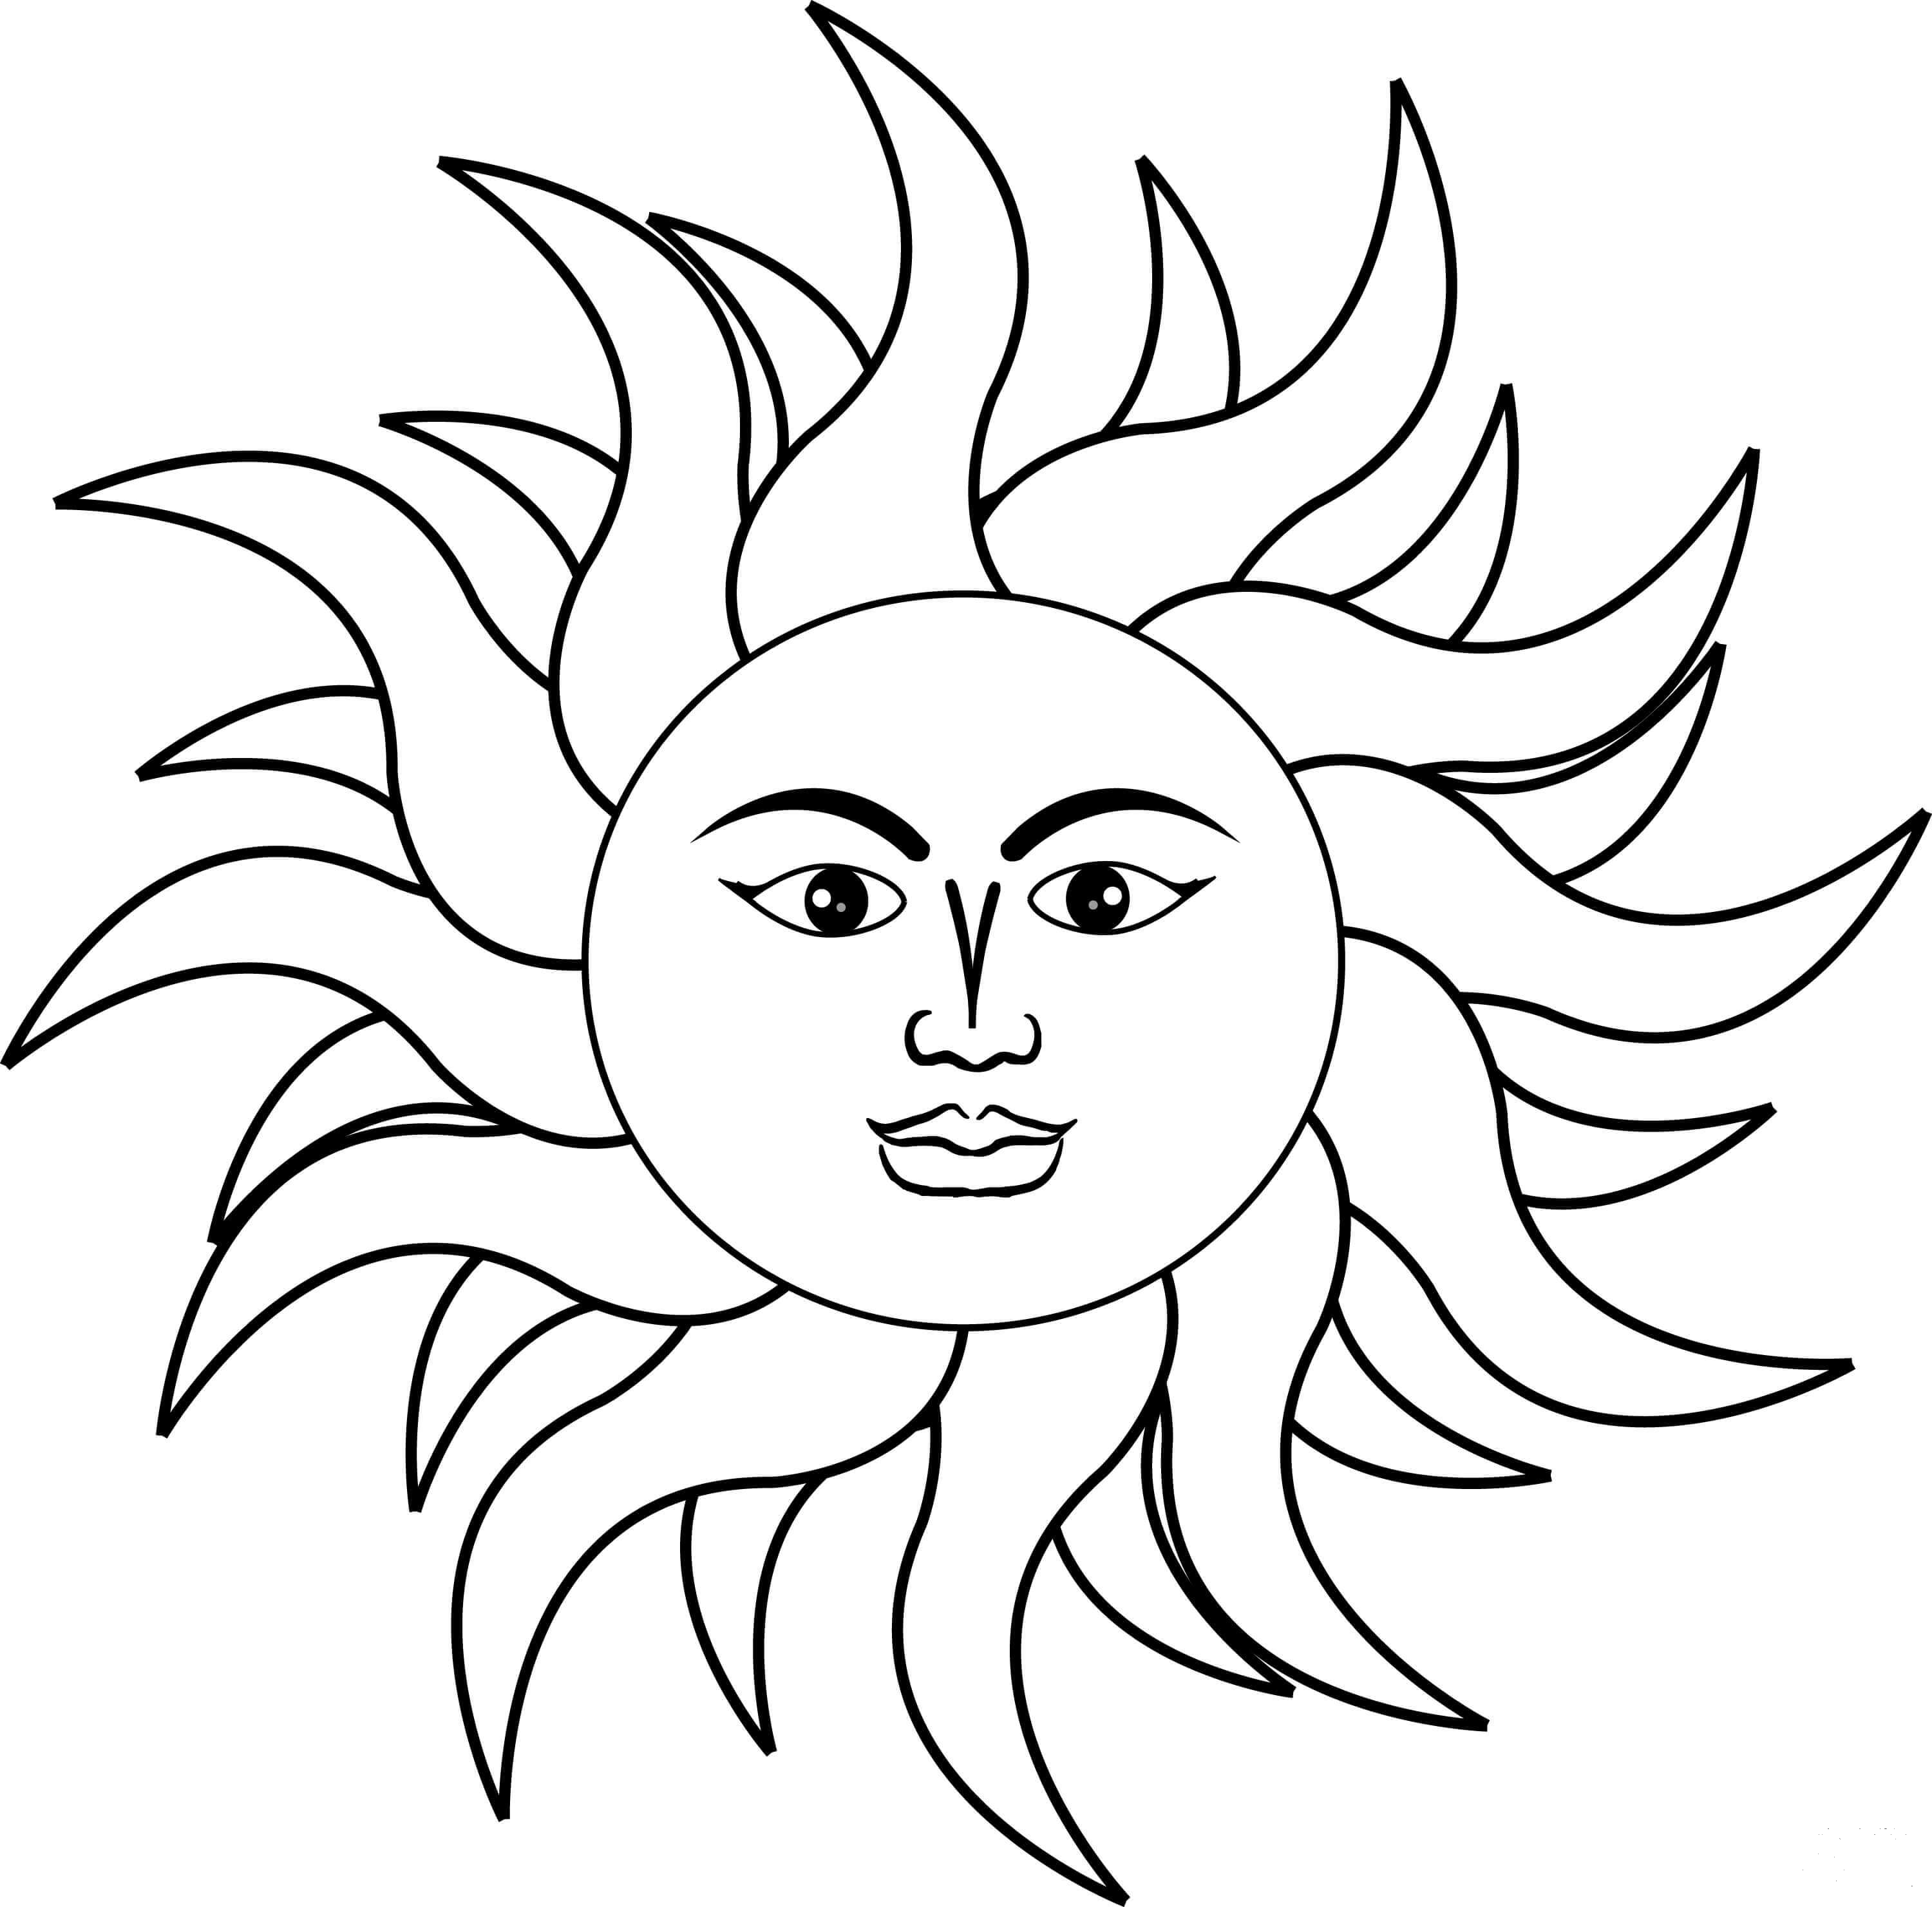 Sun coloring page - ColouringPages